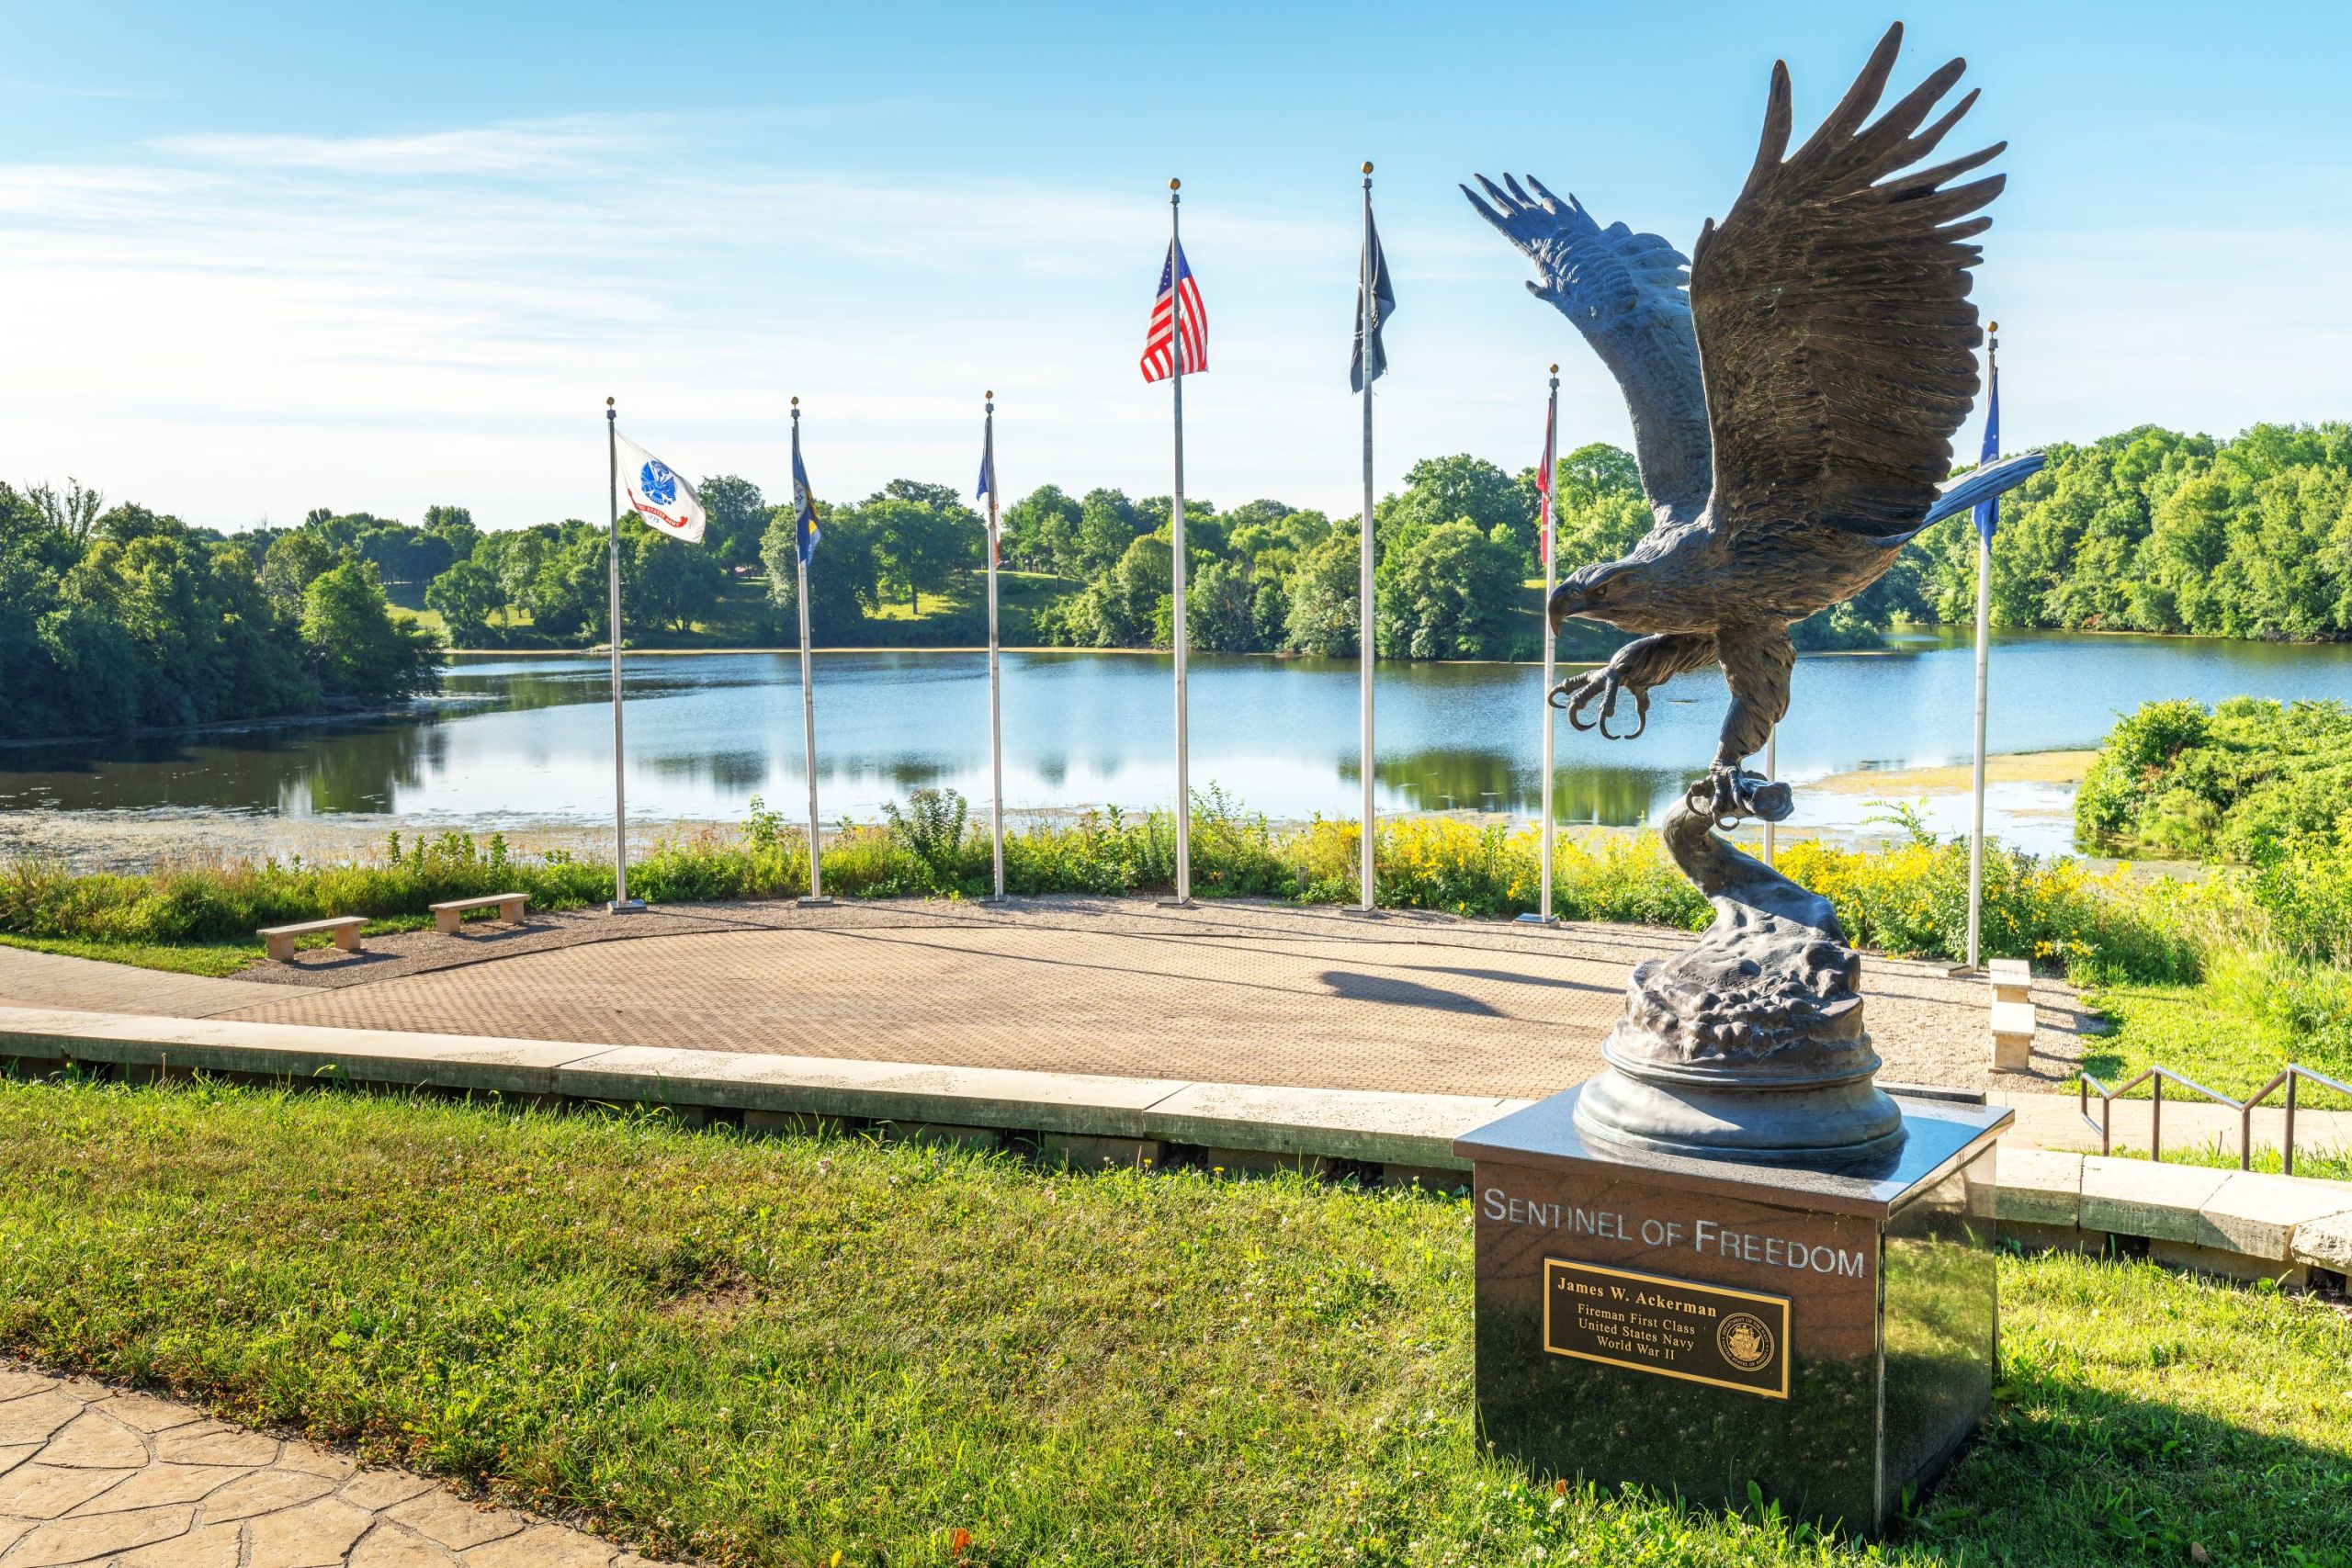 A bronze statue of an eagle with wings raised overlooks the outdoor amphitheater of a park flanked by military and national flags. This sits by a lake with forest on the far shore.